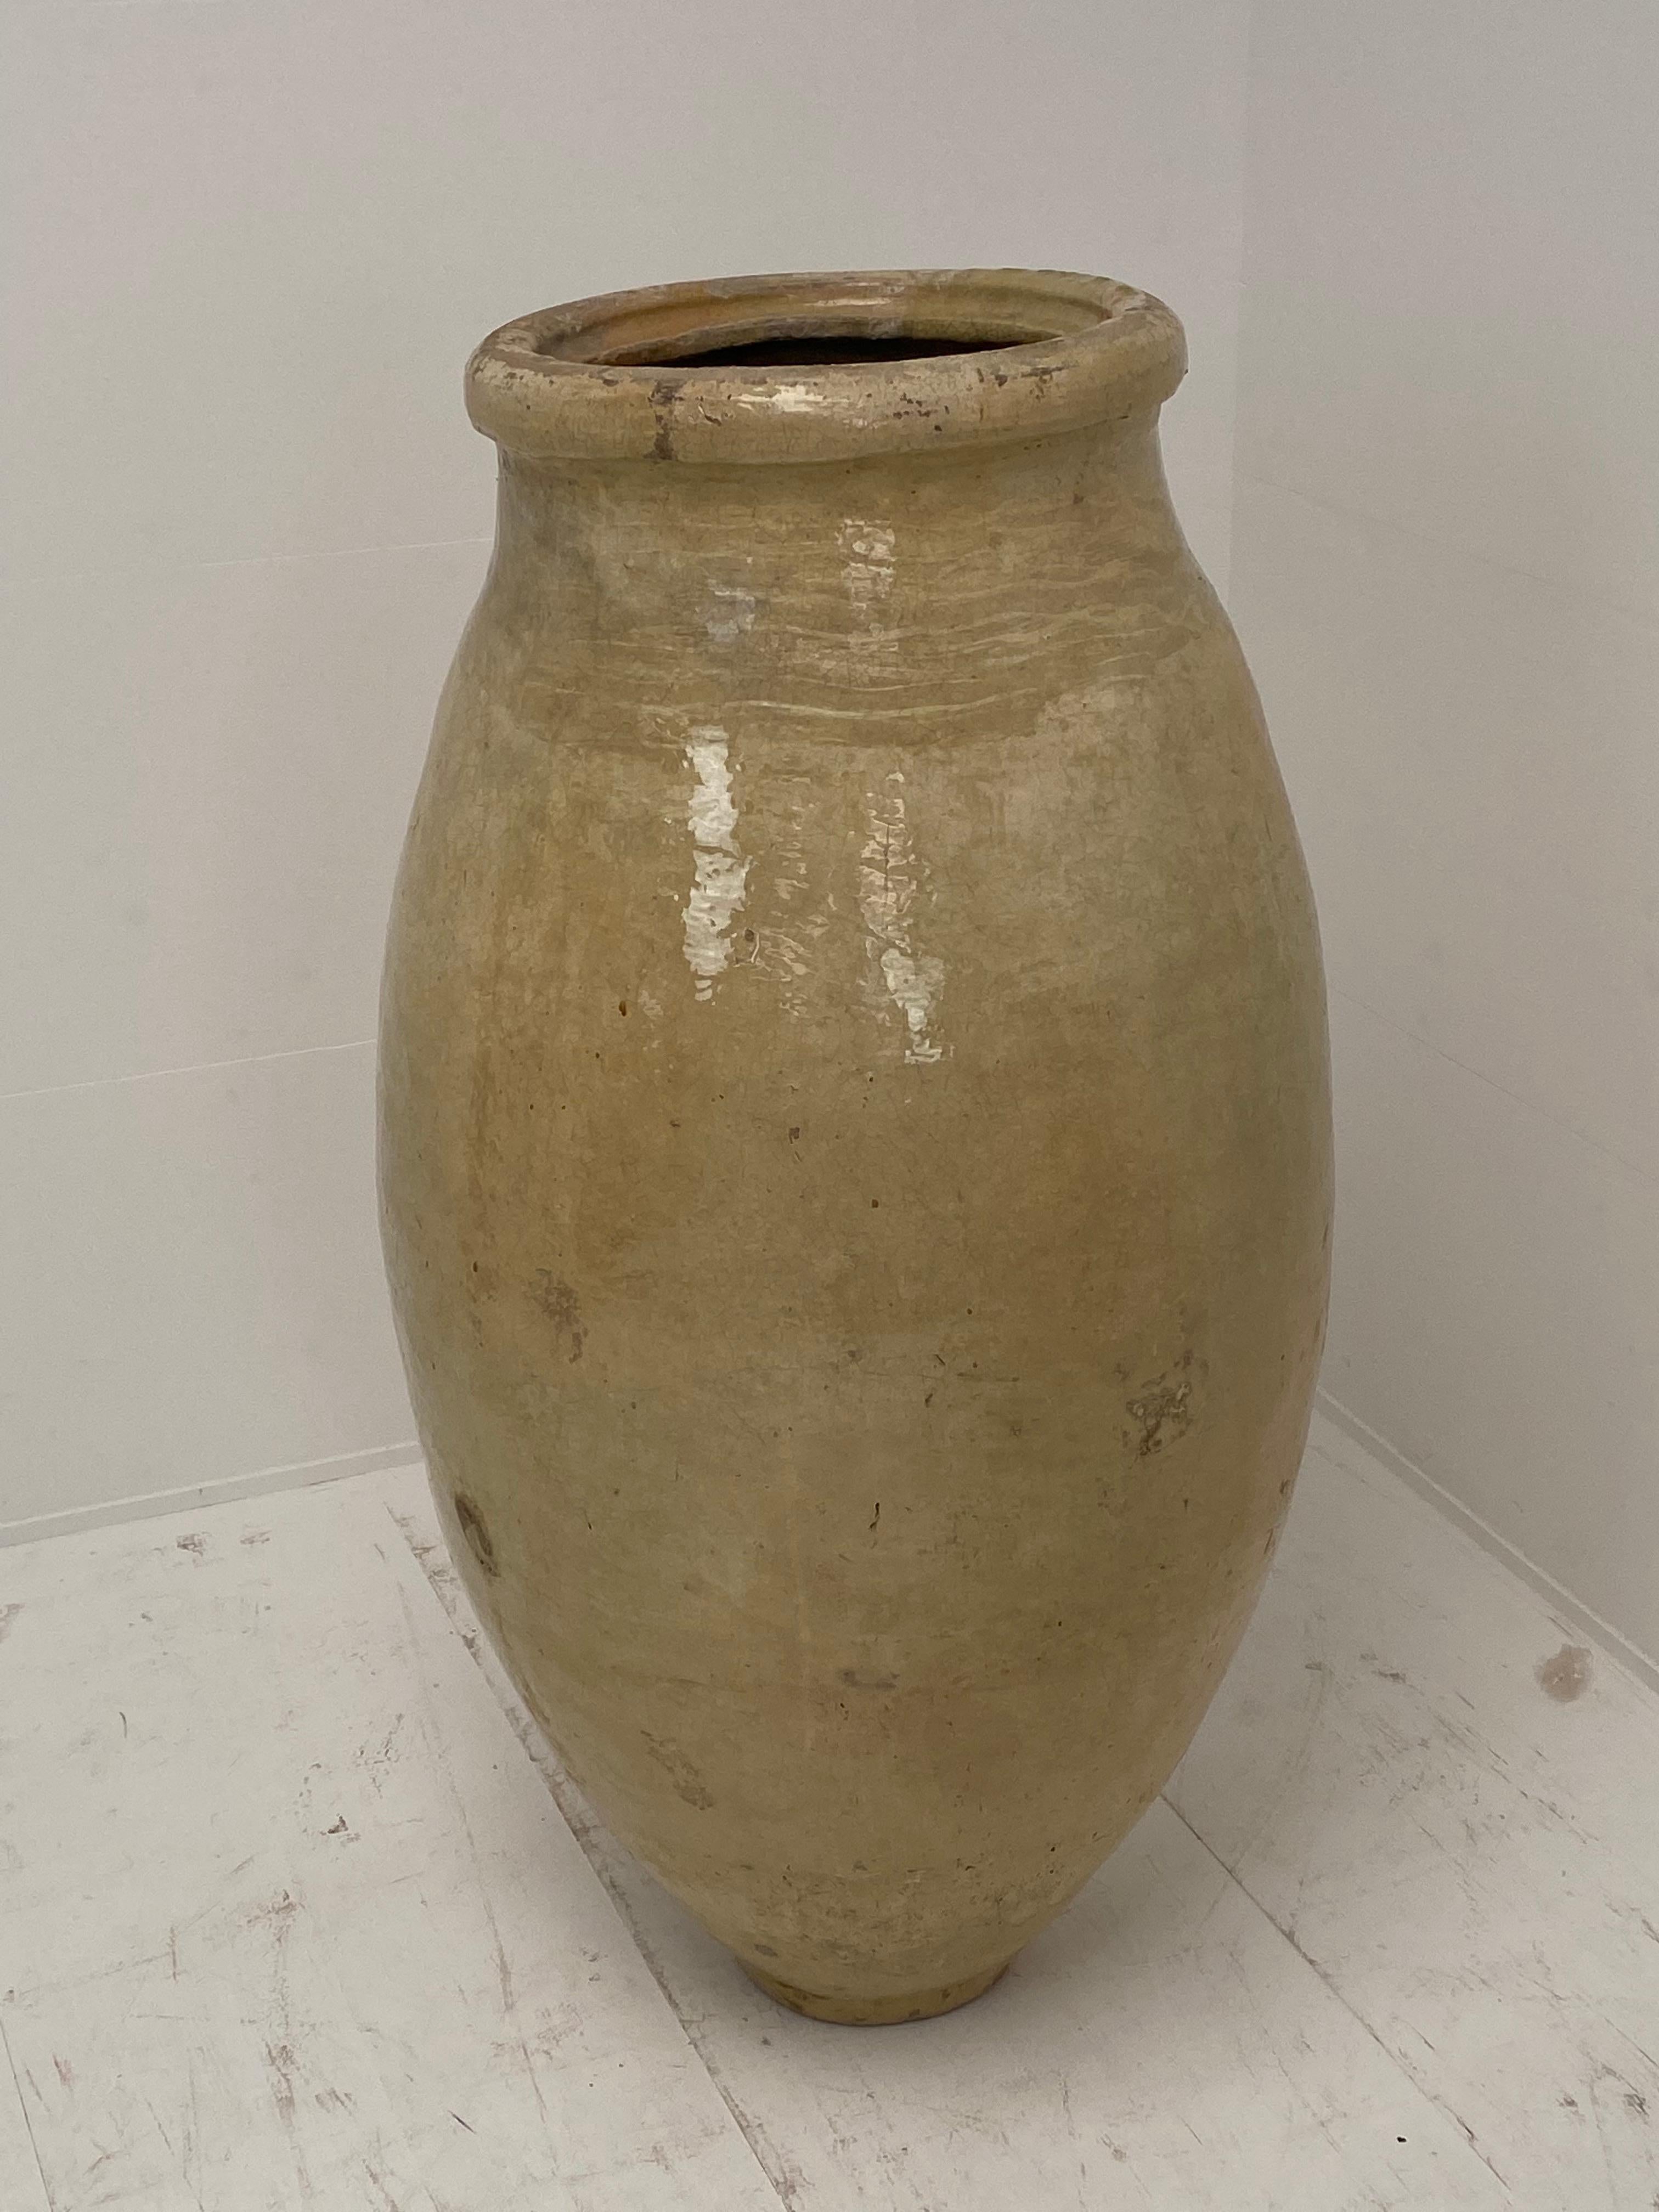 Terracotta Pot/Jar in a beautiful Cream Glazed color,
From Spain,La Bisbal De Emporda, 
comes with his original Iron stand,
great patina,1920,
total height with iron stand is 108 cm,
to be used as well inside as outside